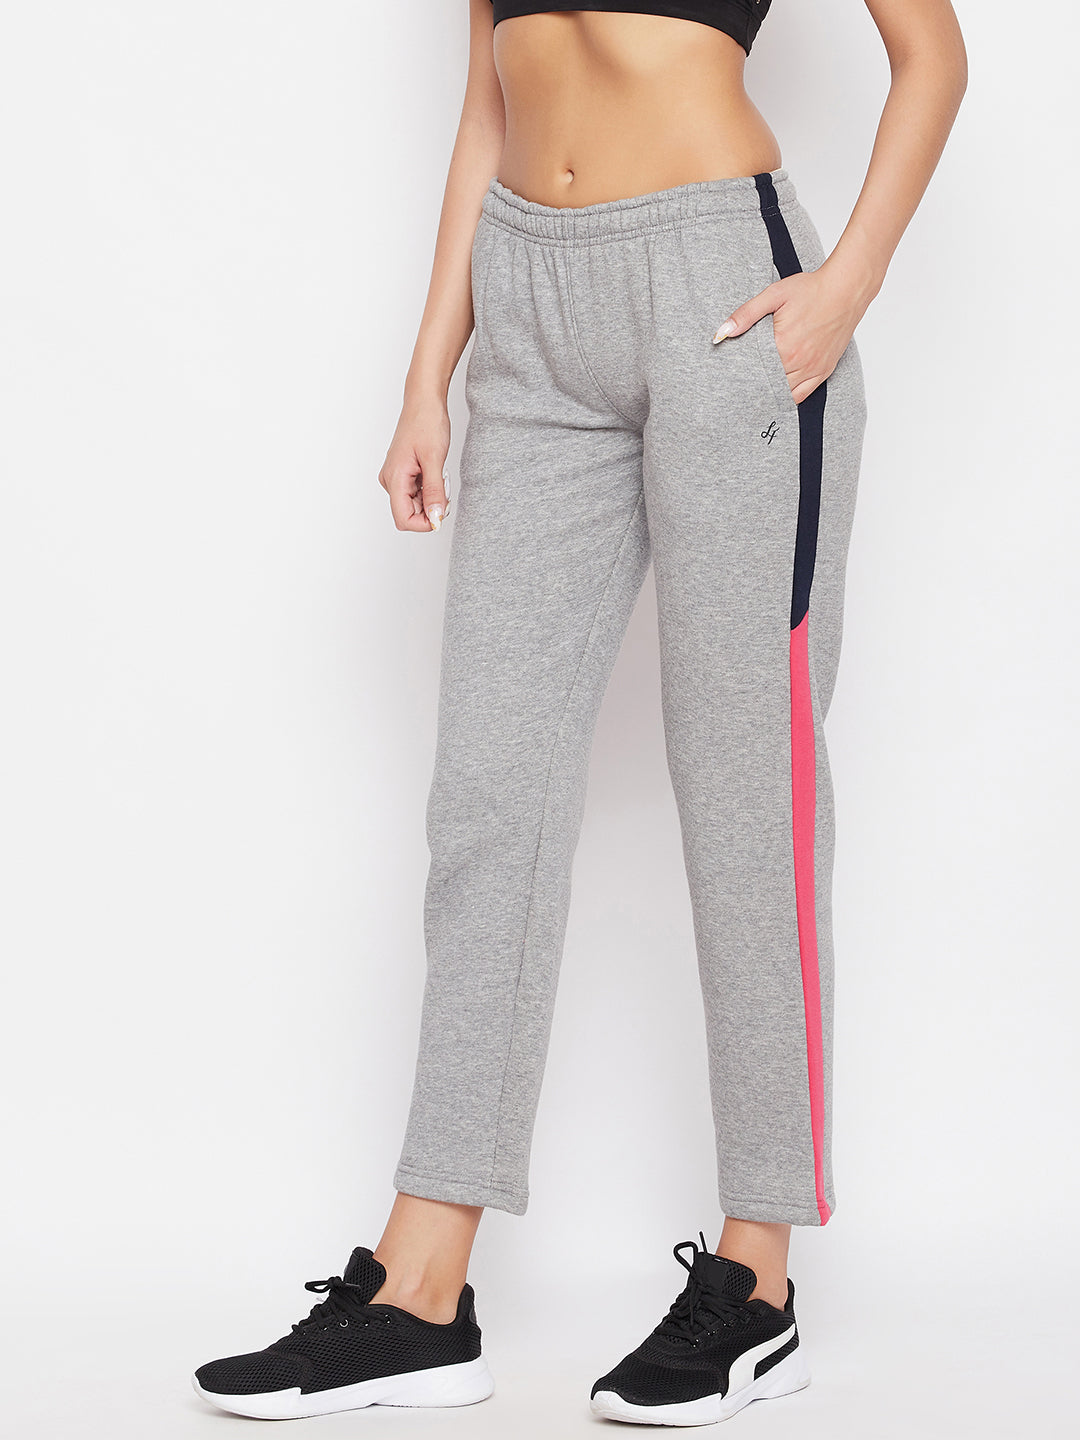 Livfree Women's Color Blocked Trackpant with pockets - 5% Milange Grey